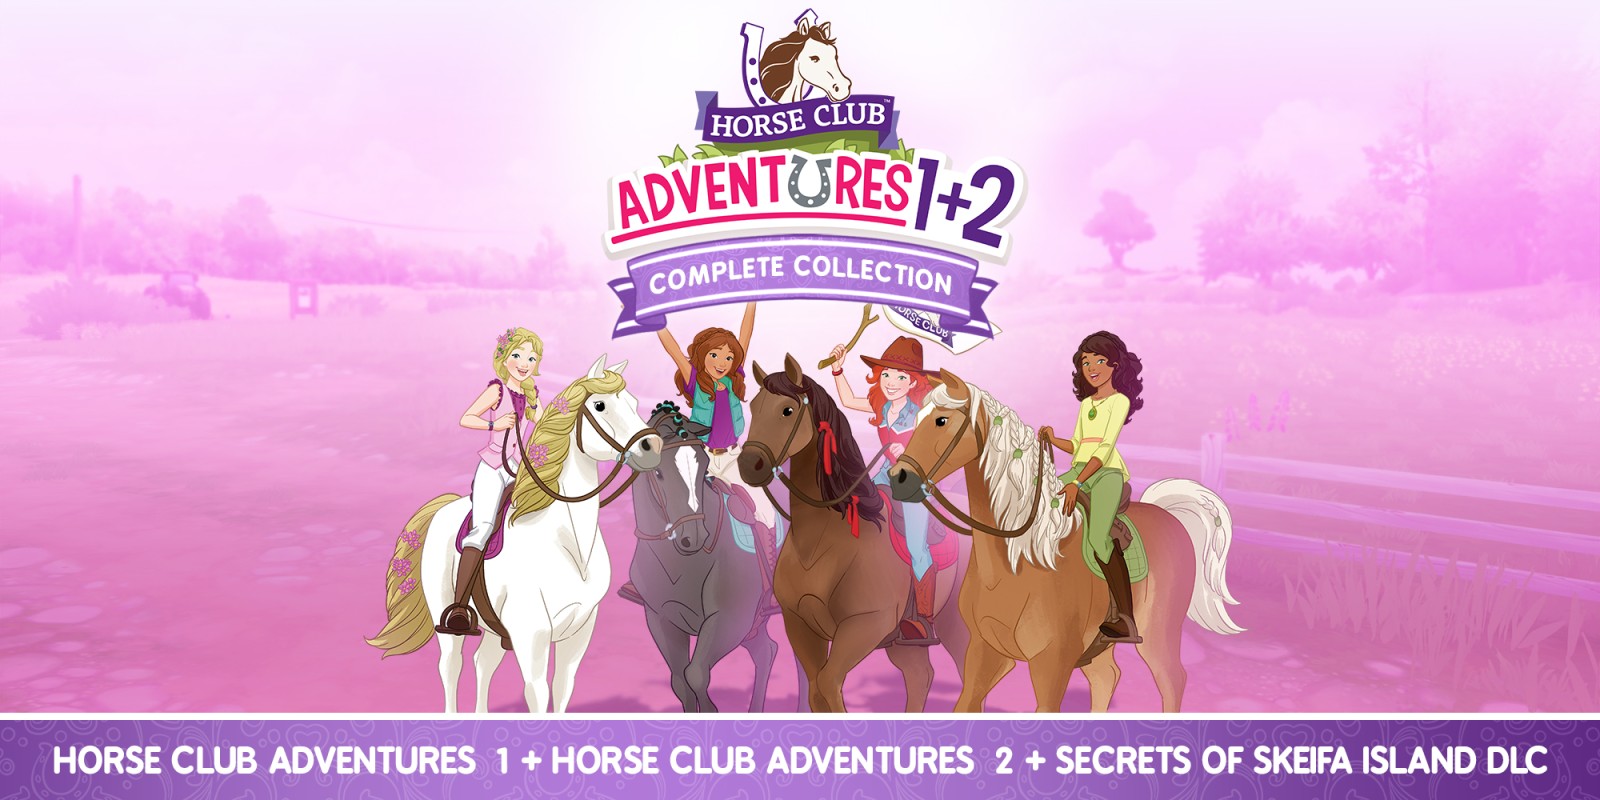 HORSE CLUB Adventures: Complete Collection